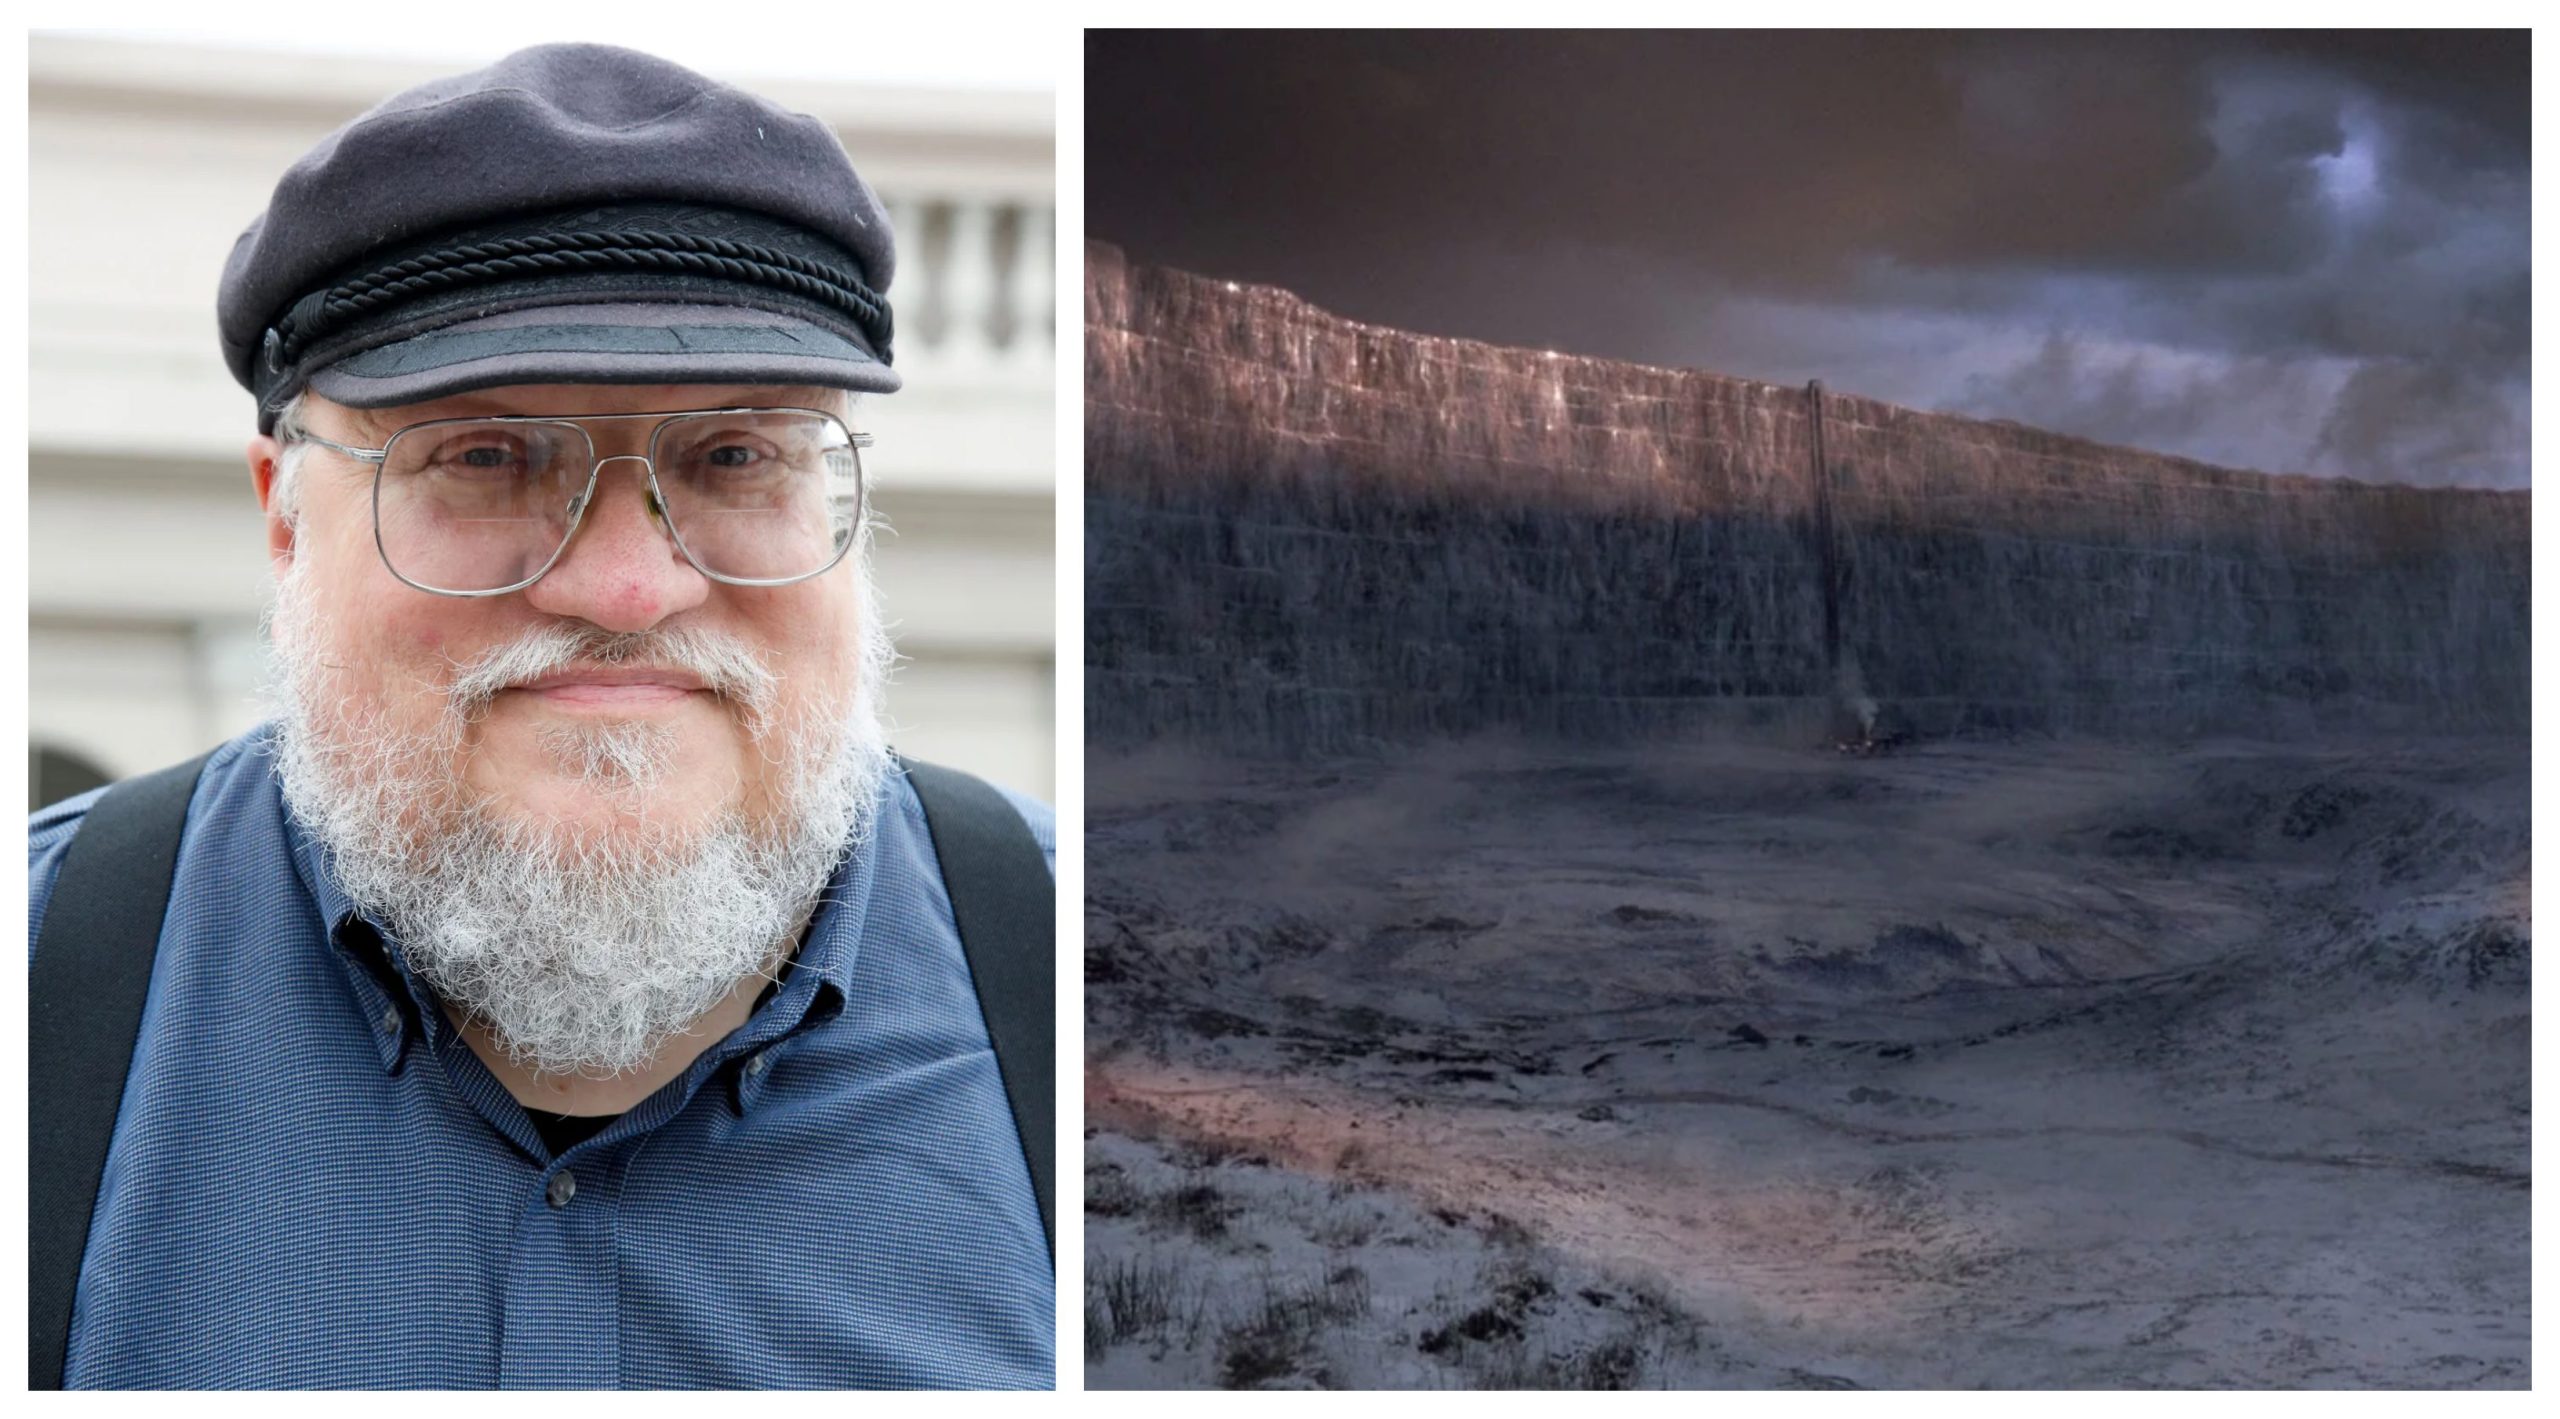 George R.R. Martin and The Wall